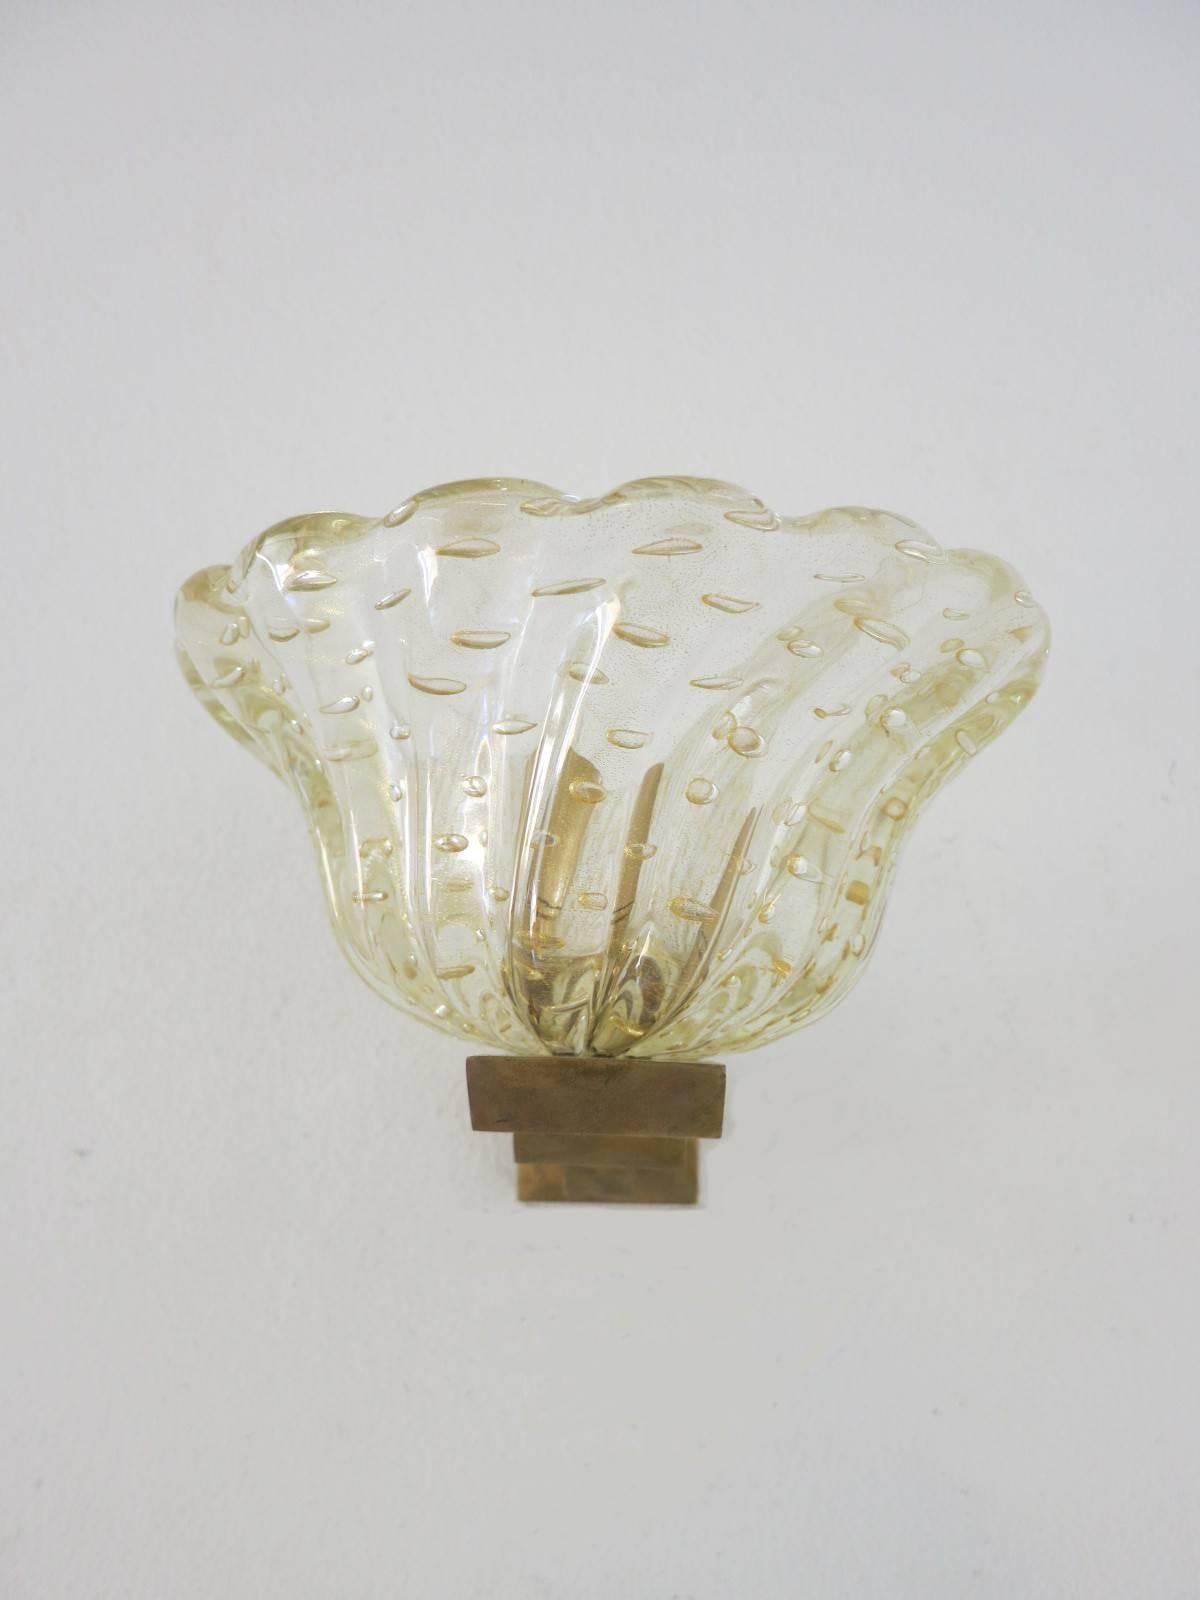 Vintage Italian wall lights with clear Murano glass infused with gold flecks and hand blown with bubbles within the glass in Pulegoso technique, mounted on brass bracket / Designed by Barovier e Toso, circa 1930s / Made in Italy
1 light / E12 or E14